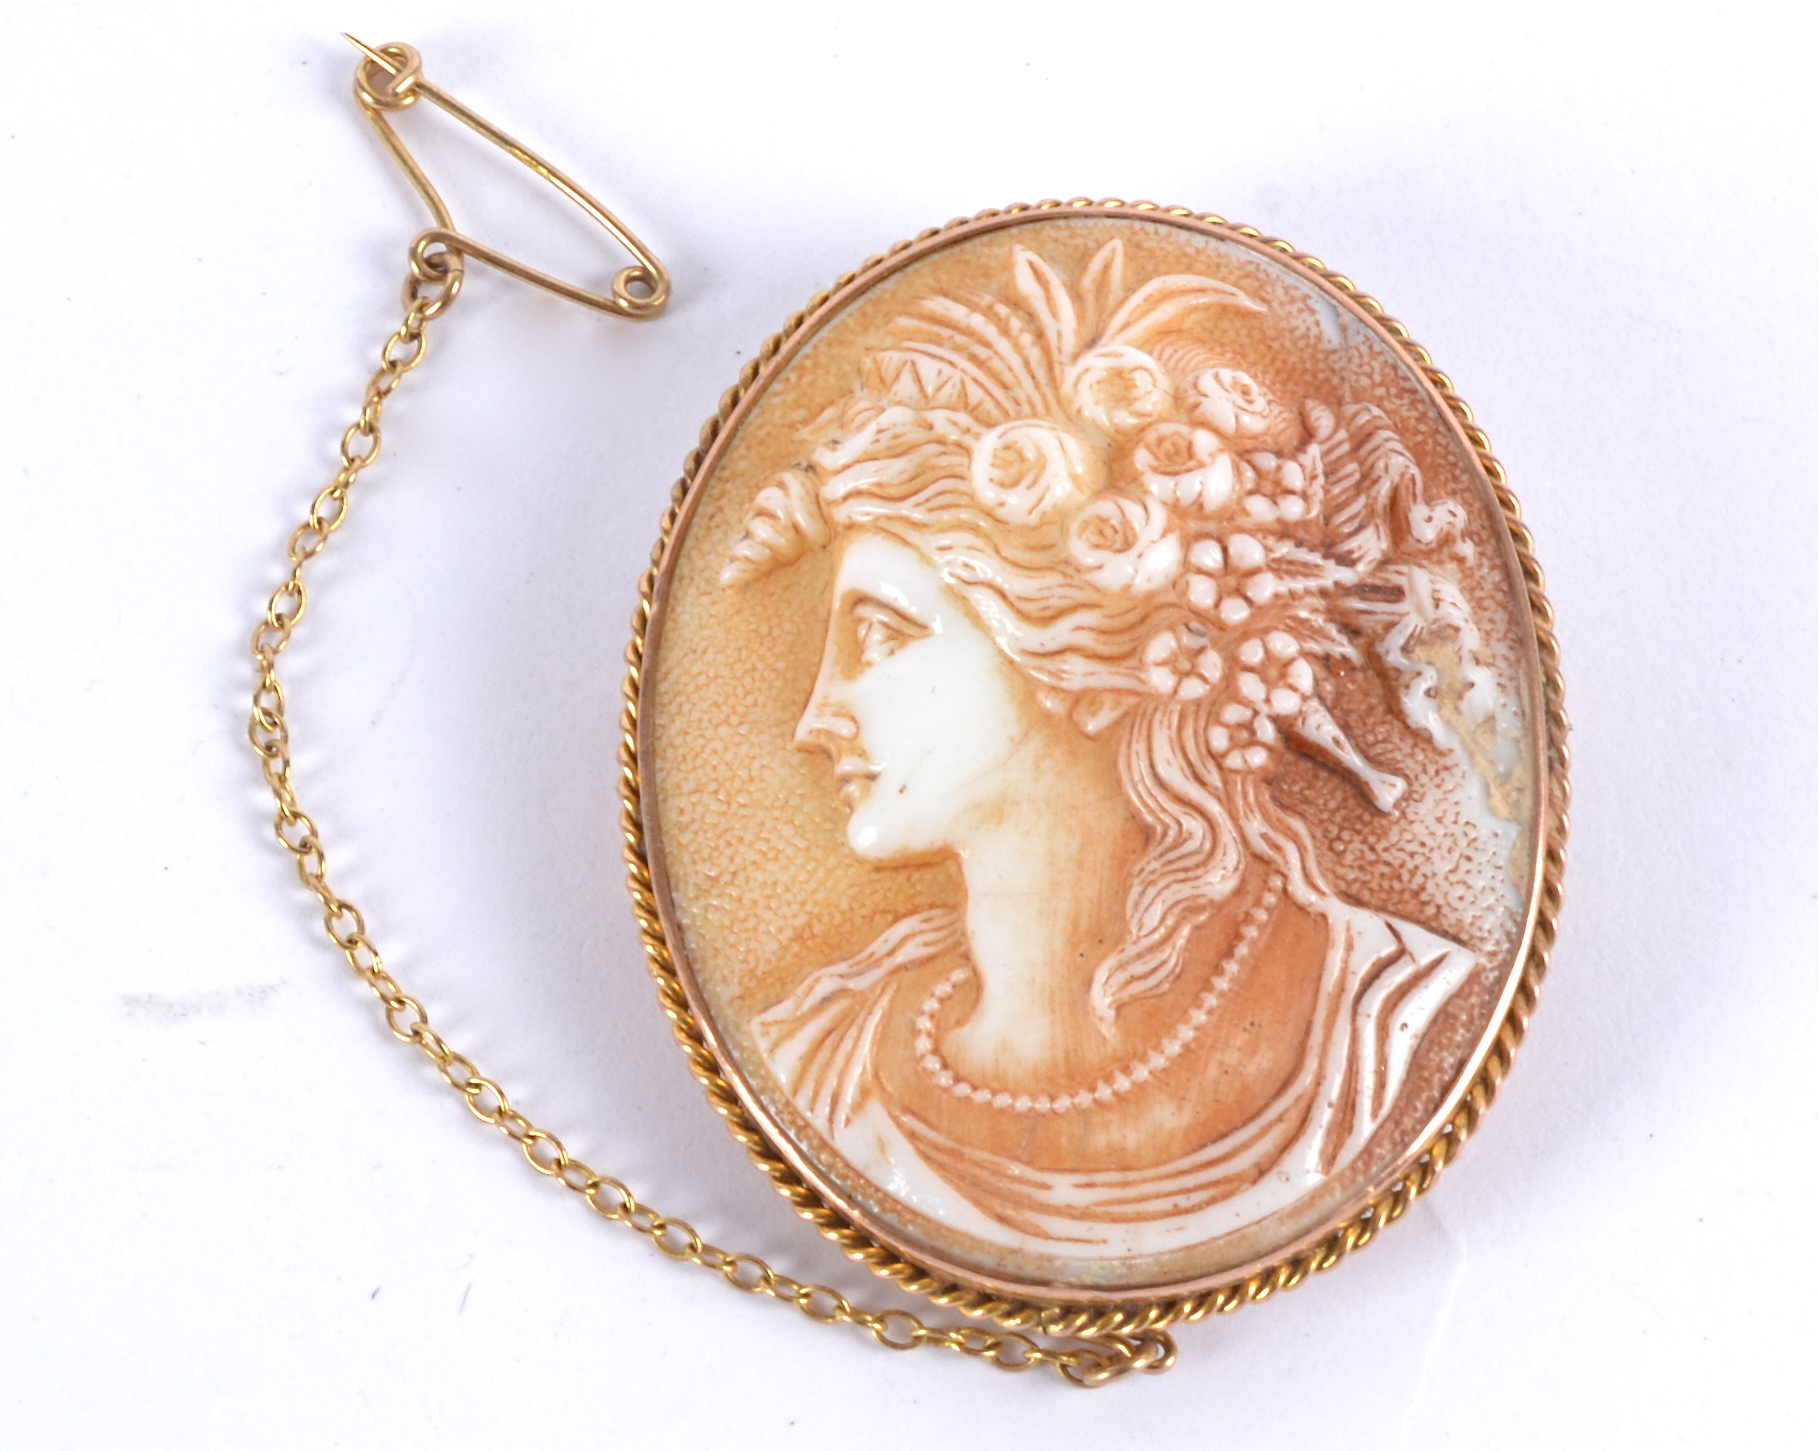 A cameo brooch featuring a woman with flowers in her hair, set in a yellow metal surround, - Image 2 of 5